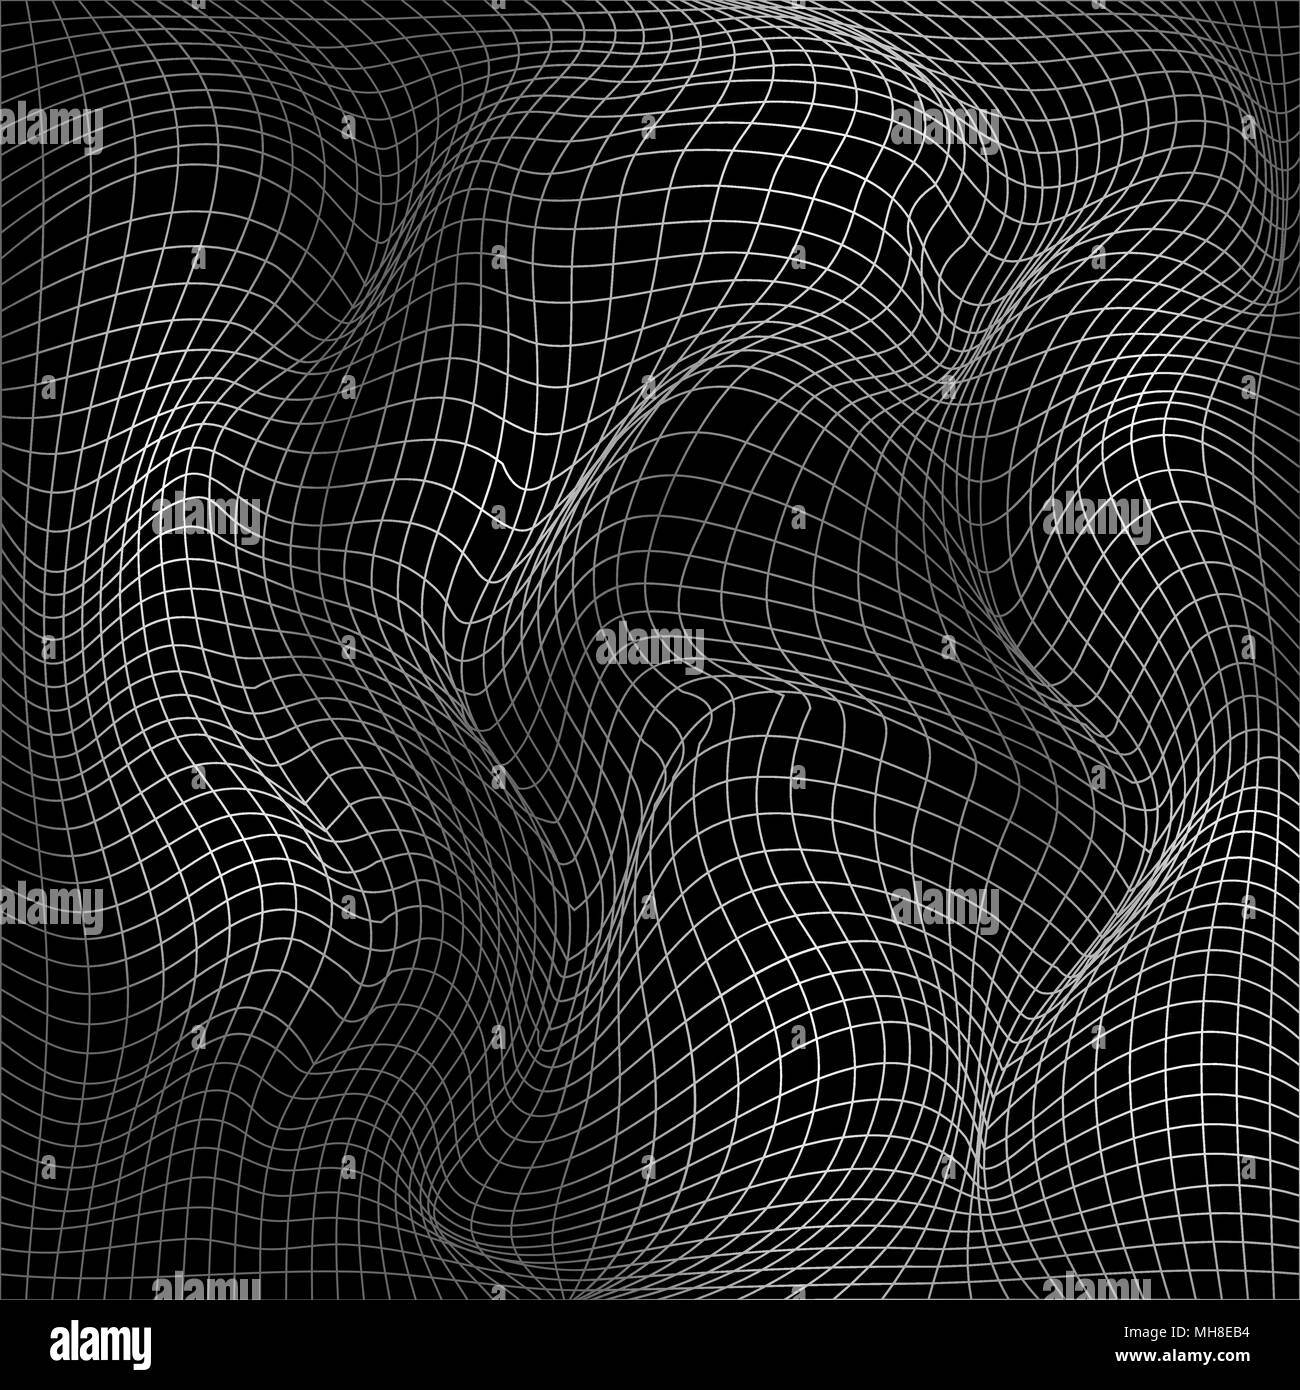 Abstract deformation of net. Wavy motion mesh 3d structure. Vector illustration isolated on dark background Stock Vector